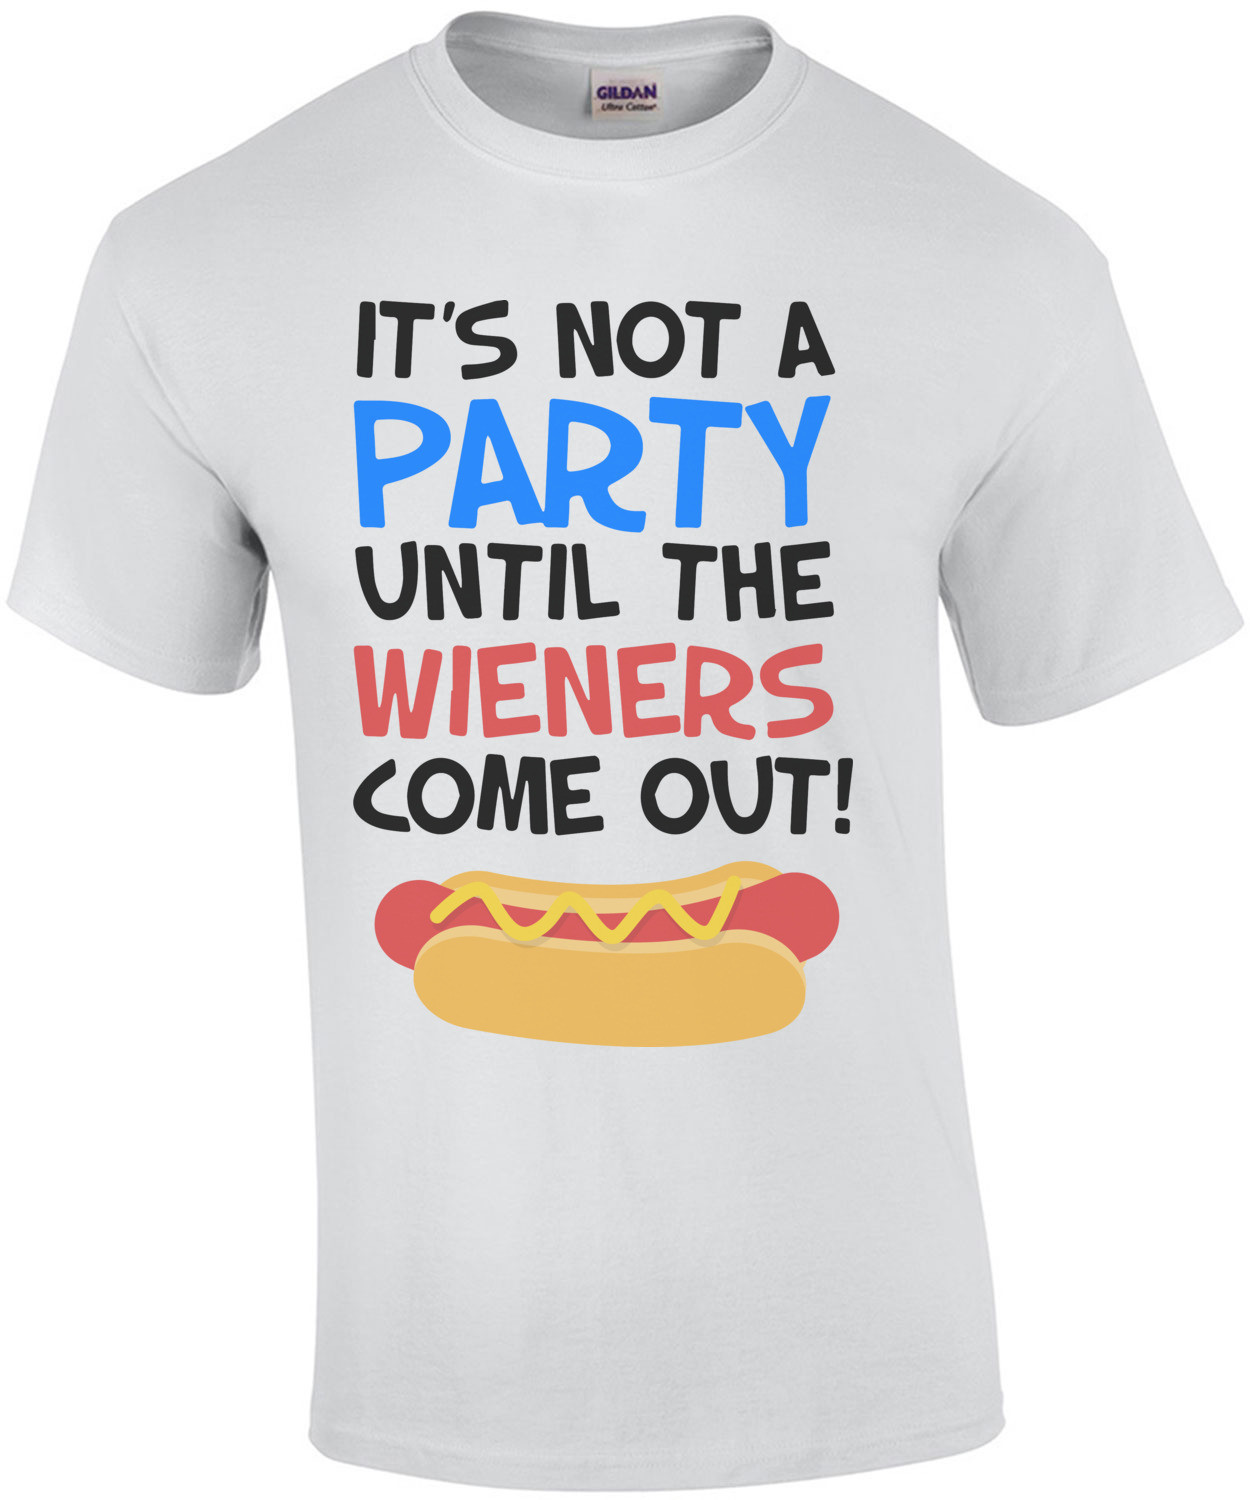 It's not a party until the wieners come out! Funny T-Shirt